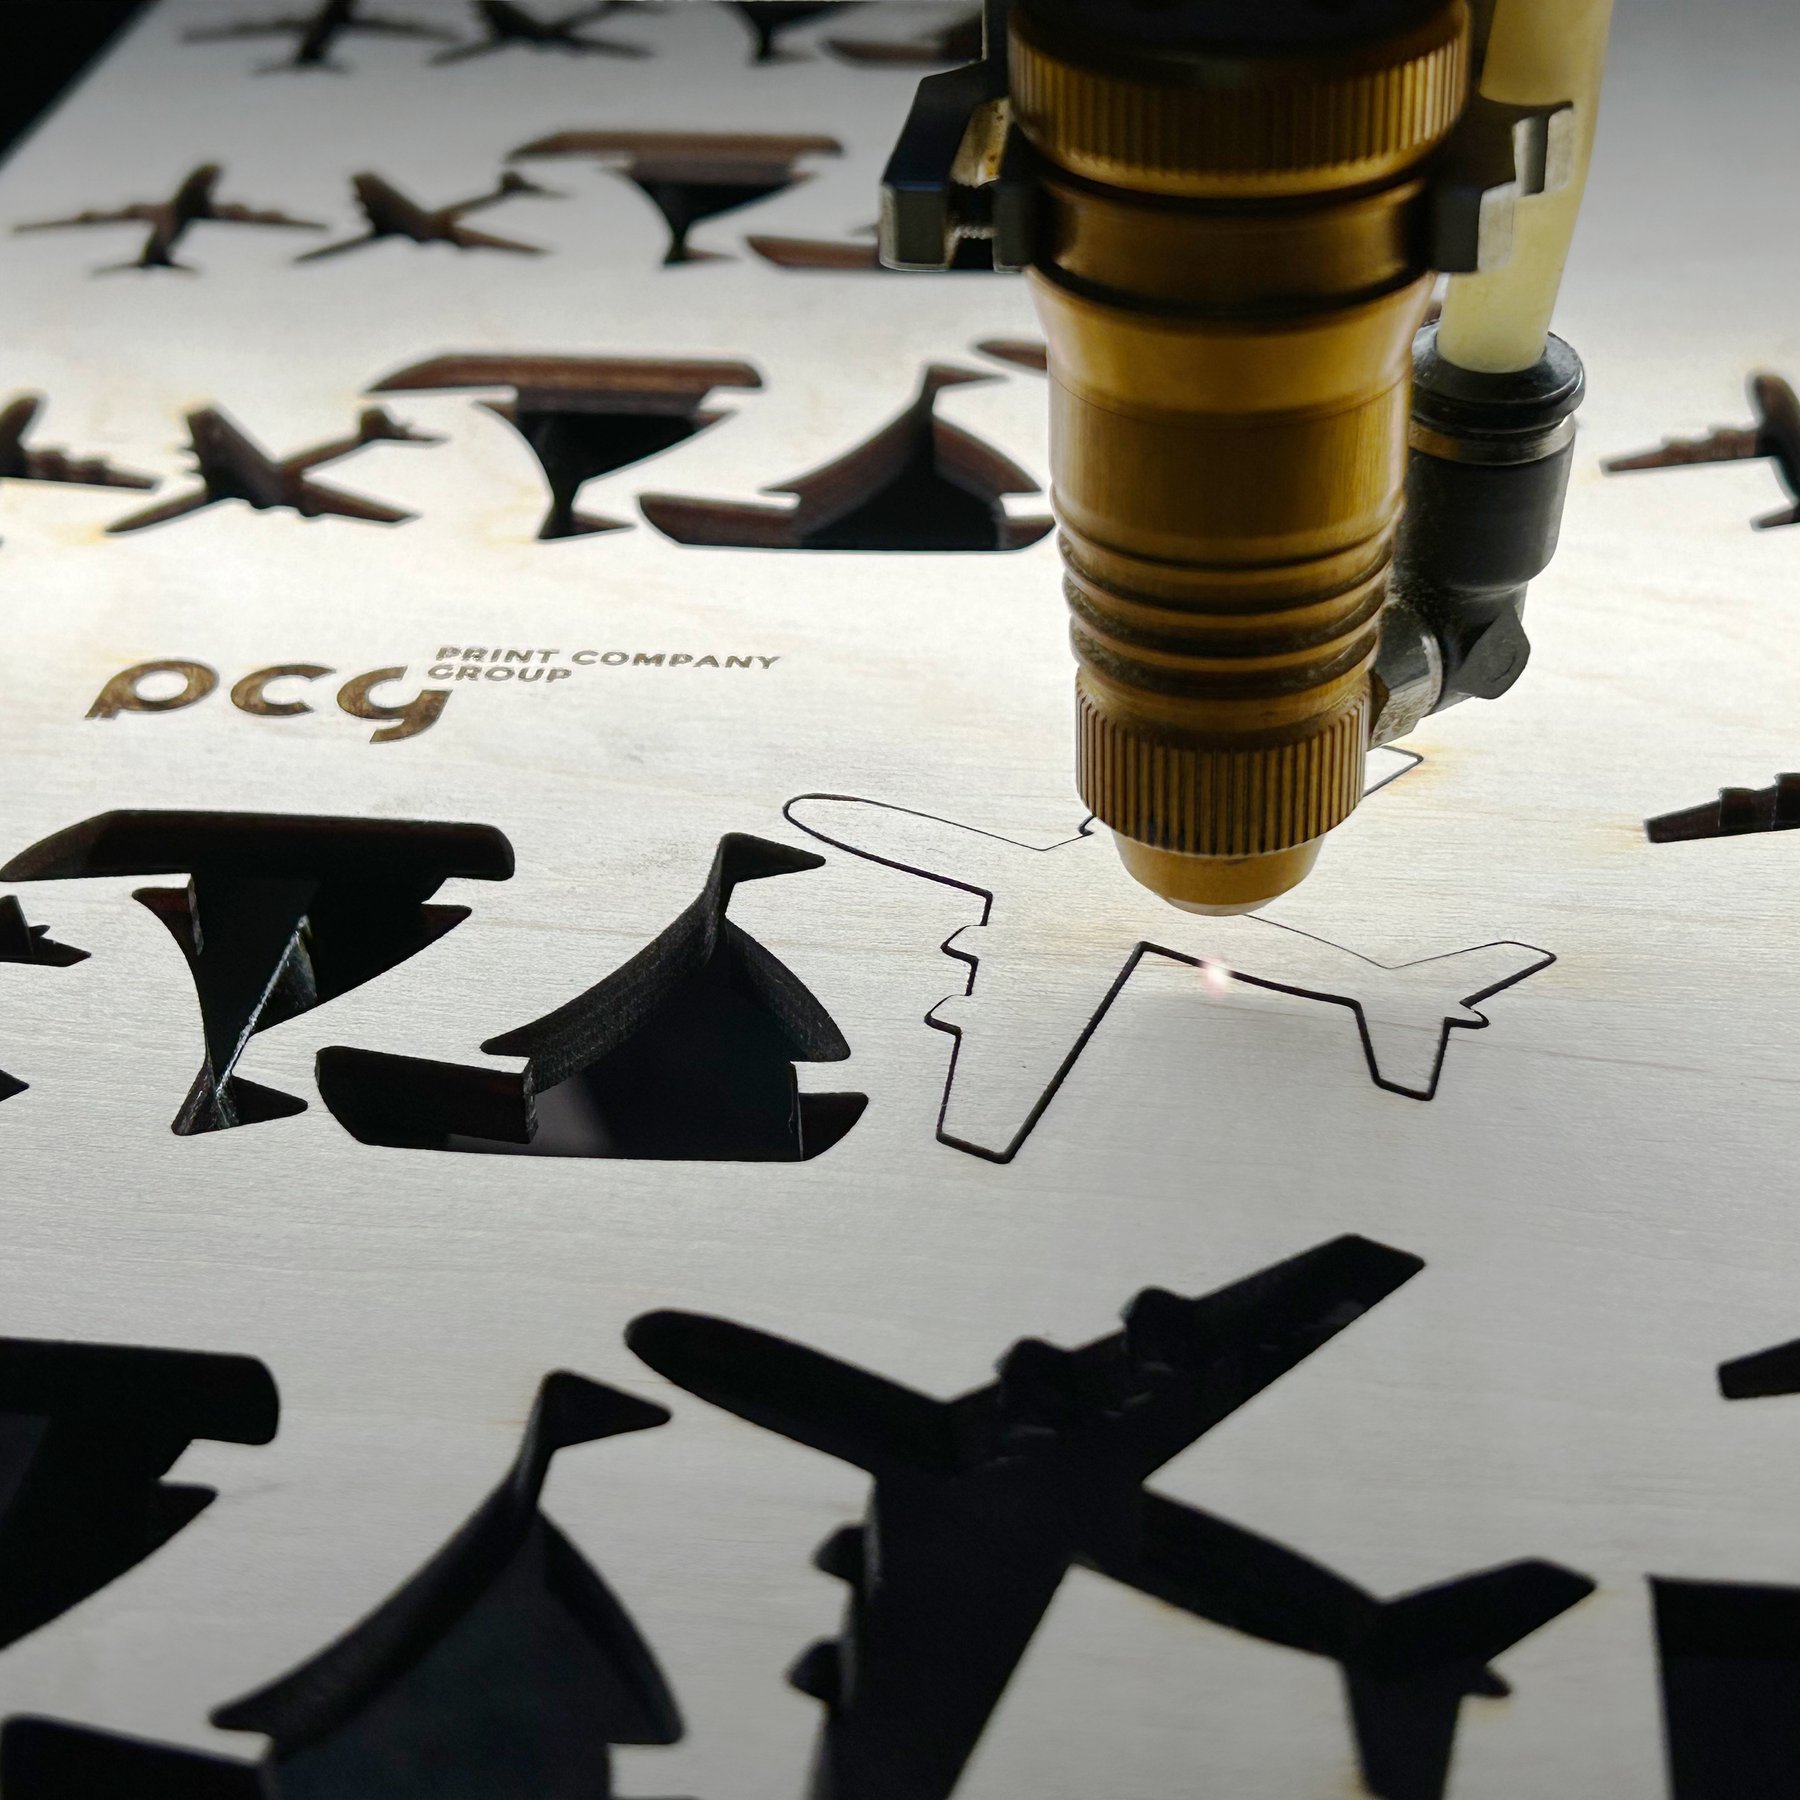 Laser cutting of plywood